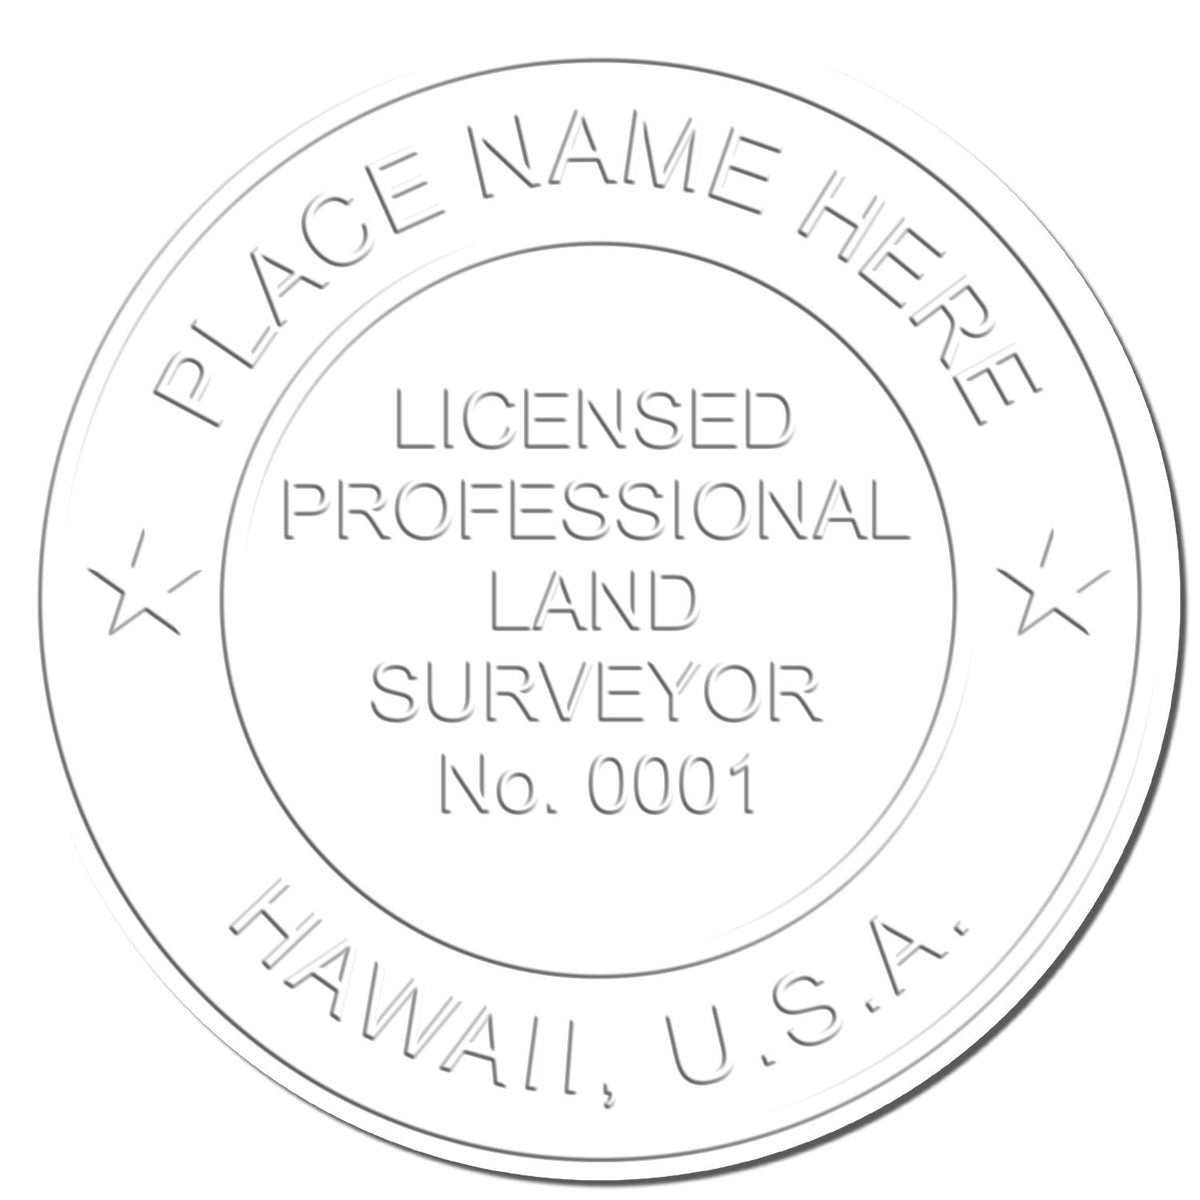 This paper is stamped with a sample imprint of the Hawaii Desk Surveyor Seal Embosser, signifying its quality and reliability.